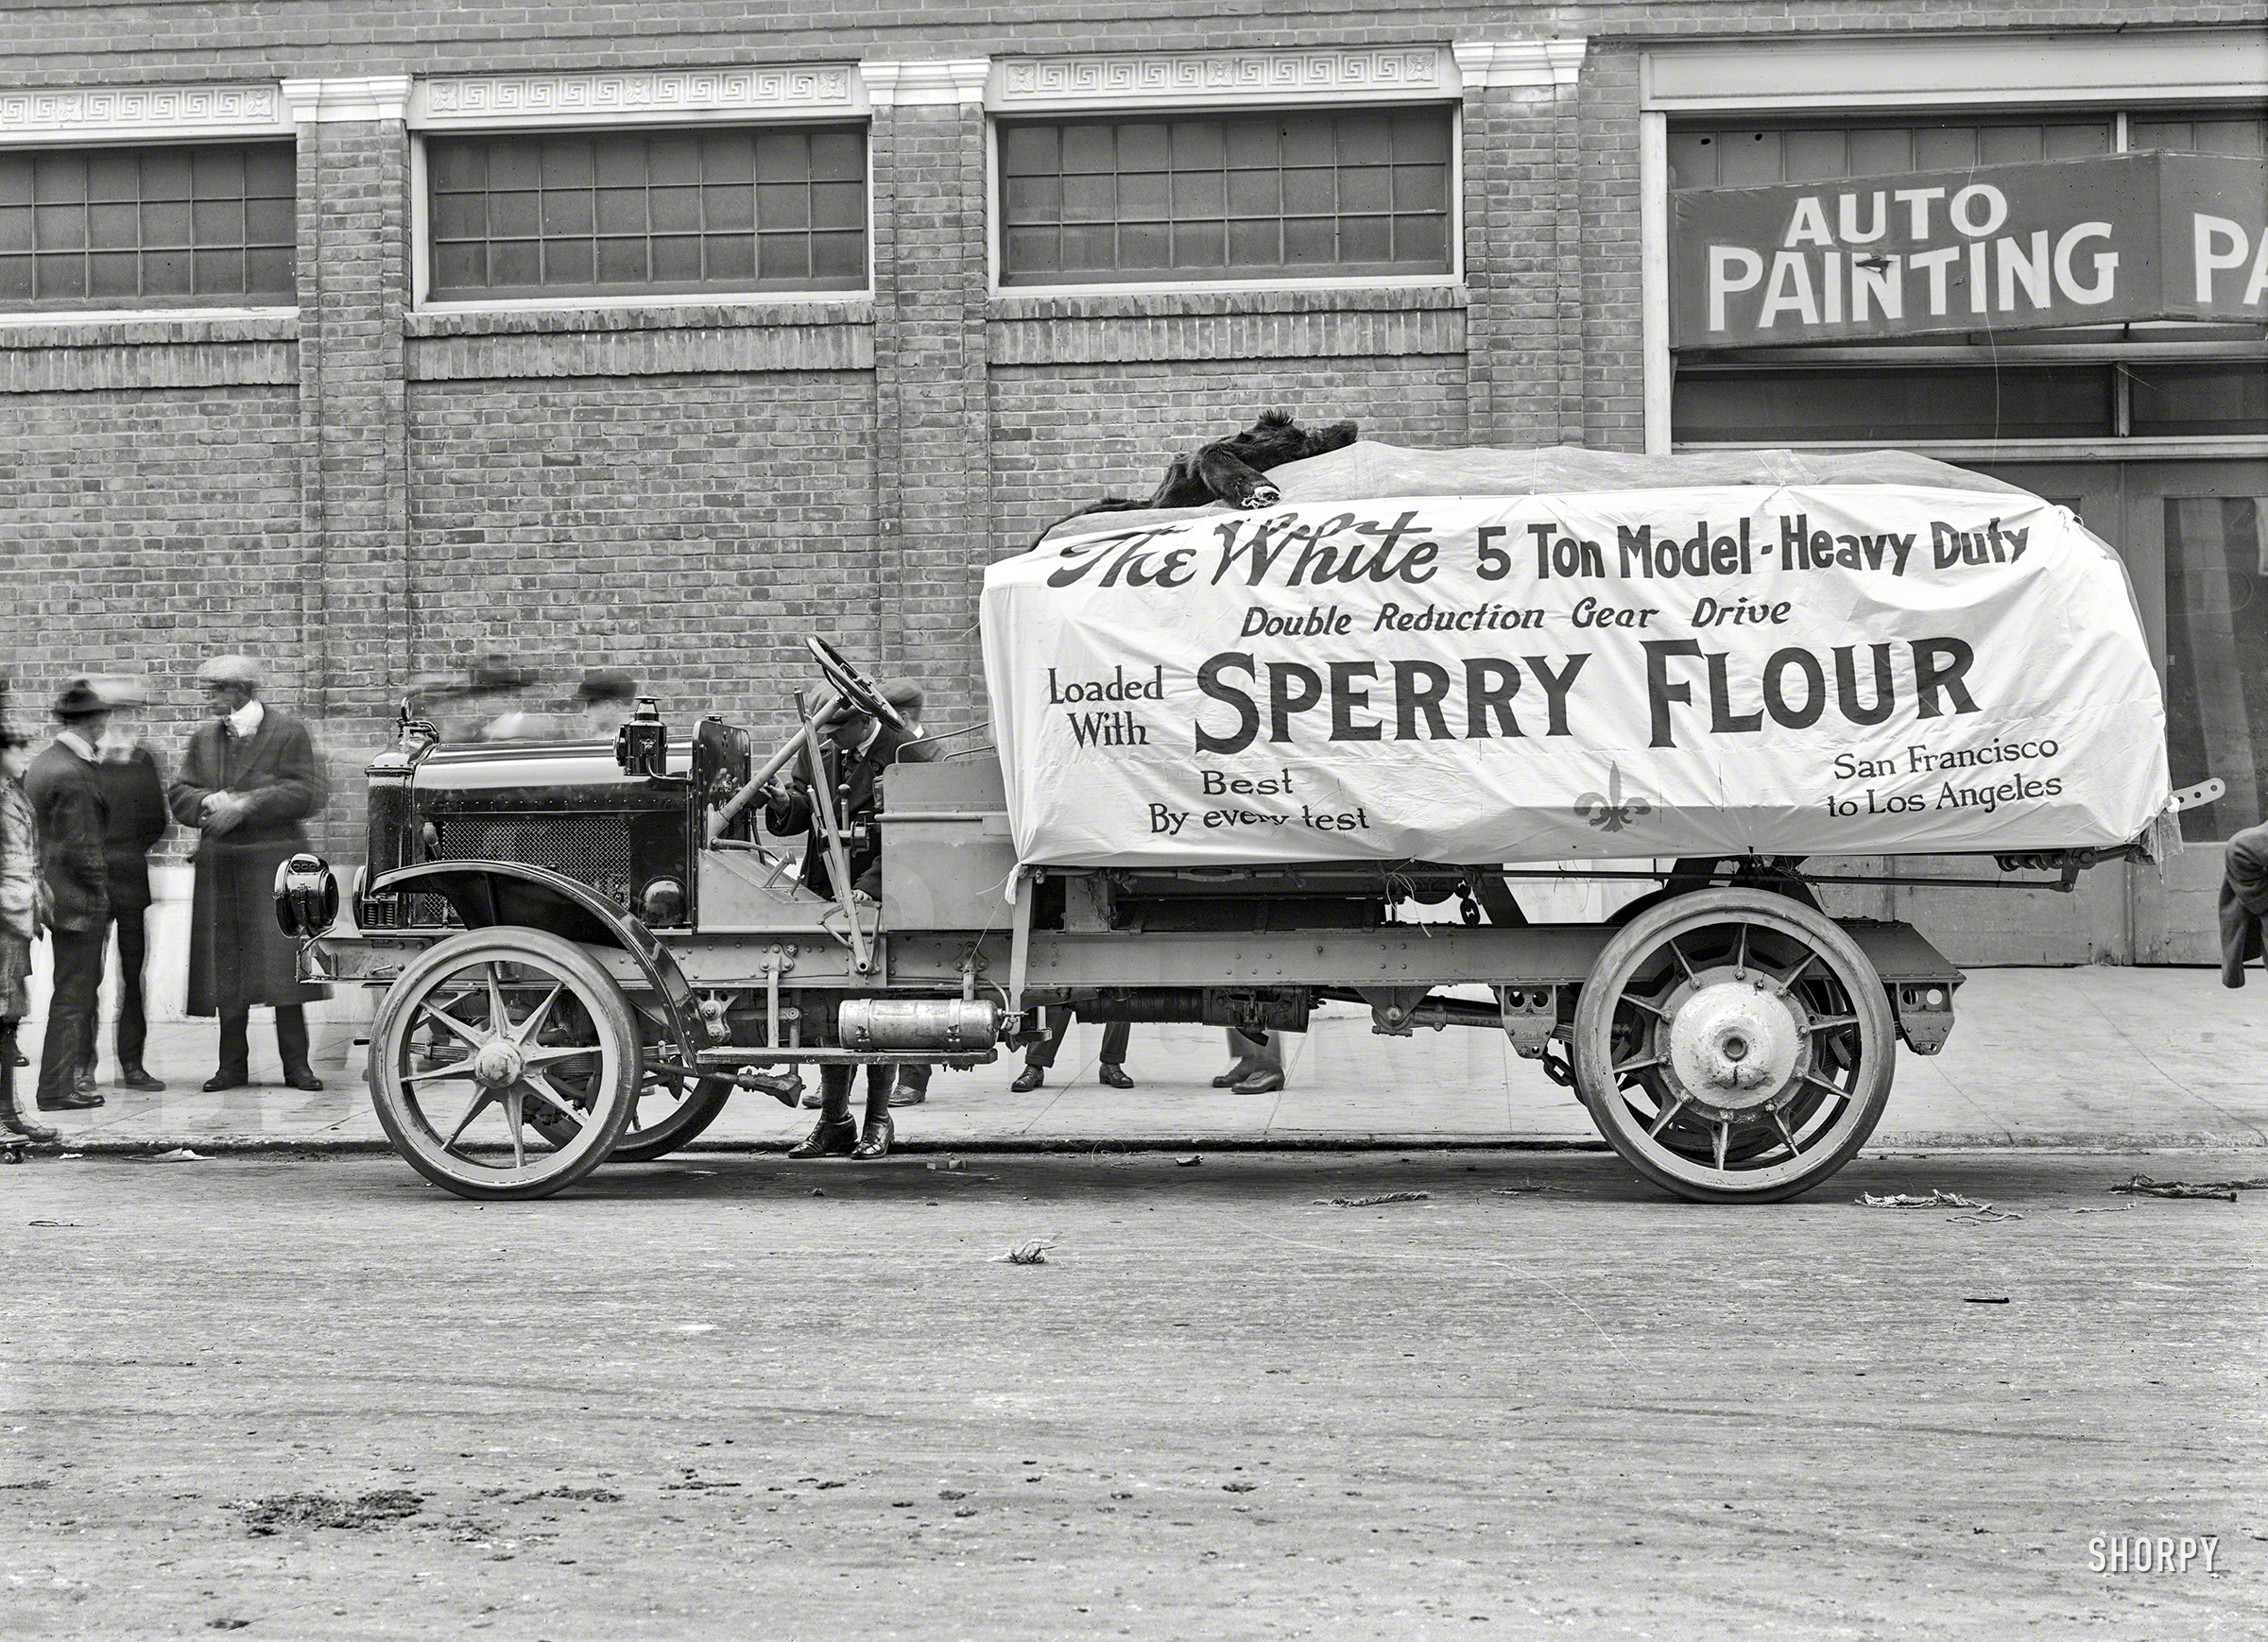 San Francisco circa 1918. "White 5-ton motor truck loaded with Sperry Flour bound for Los Angeles." Guarded by what looks to be a prototype version of the Cookie Monster. 5x7 glass negative by Christopher Helin. View full size.